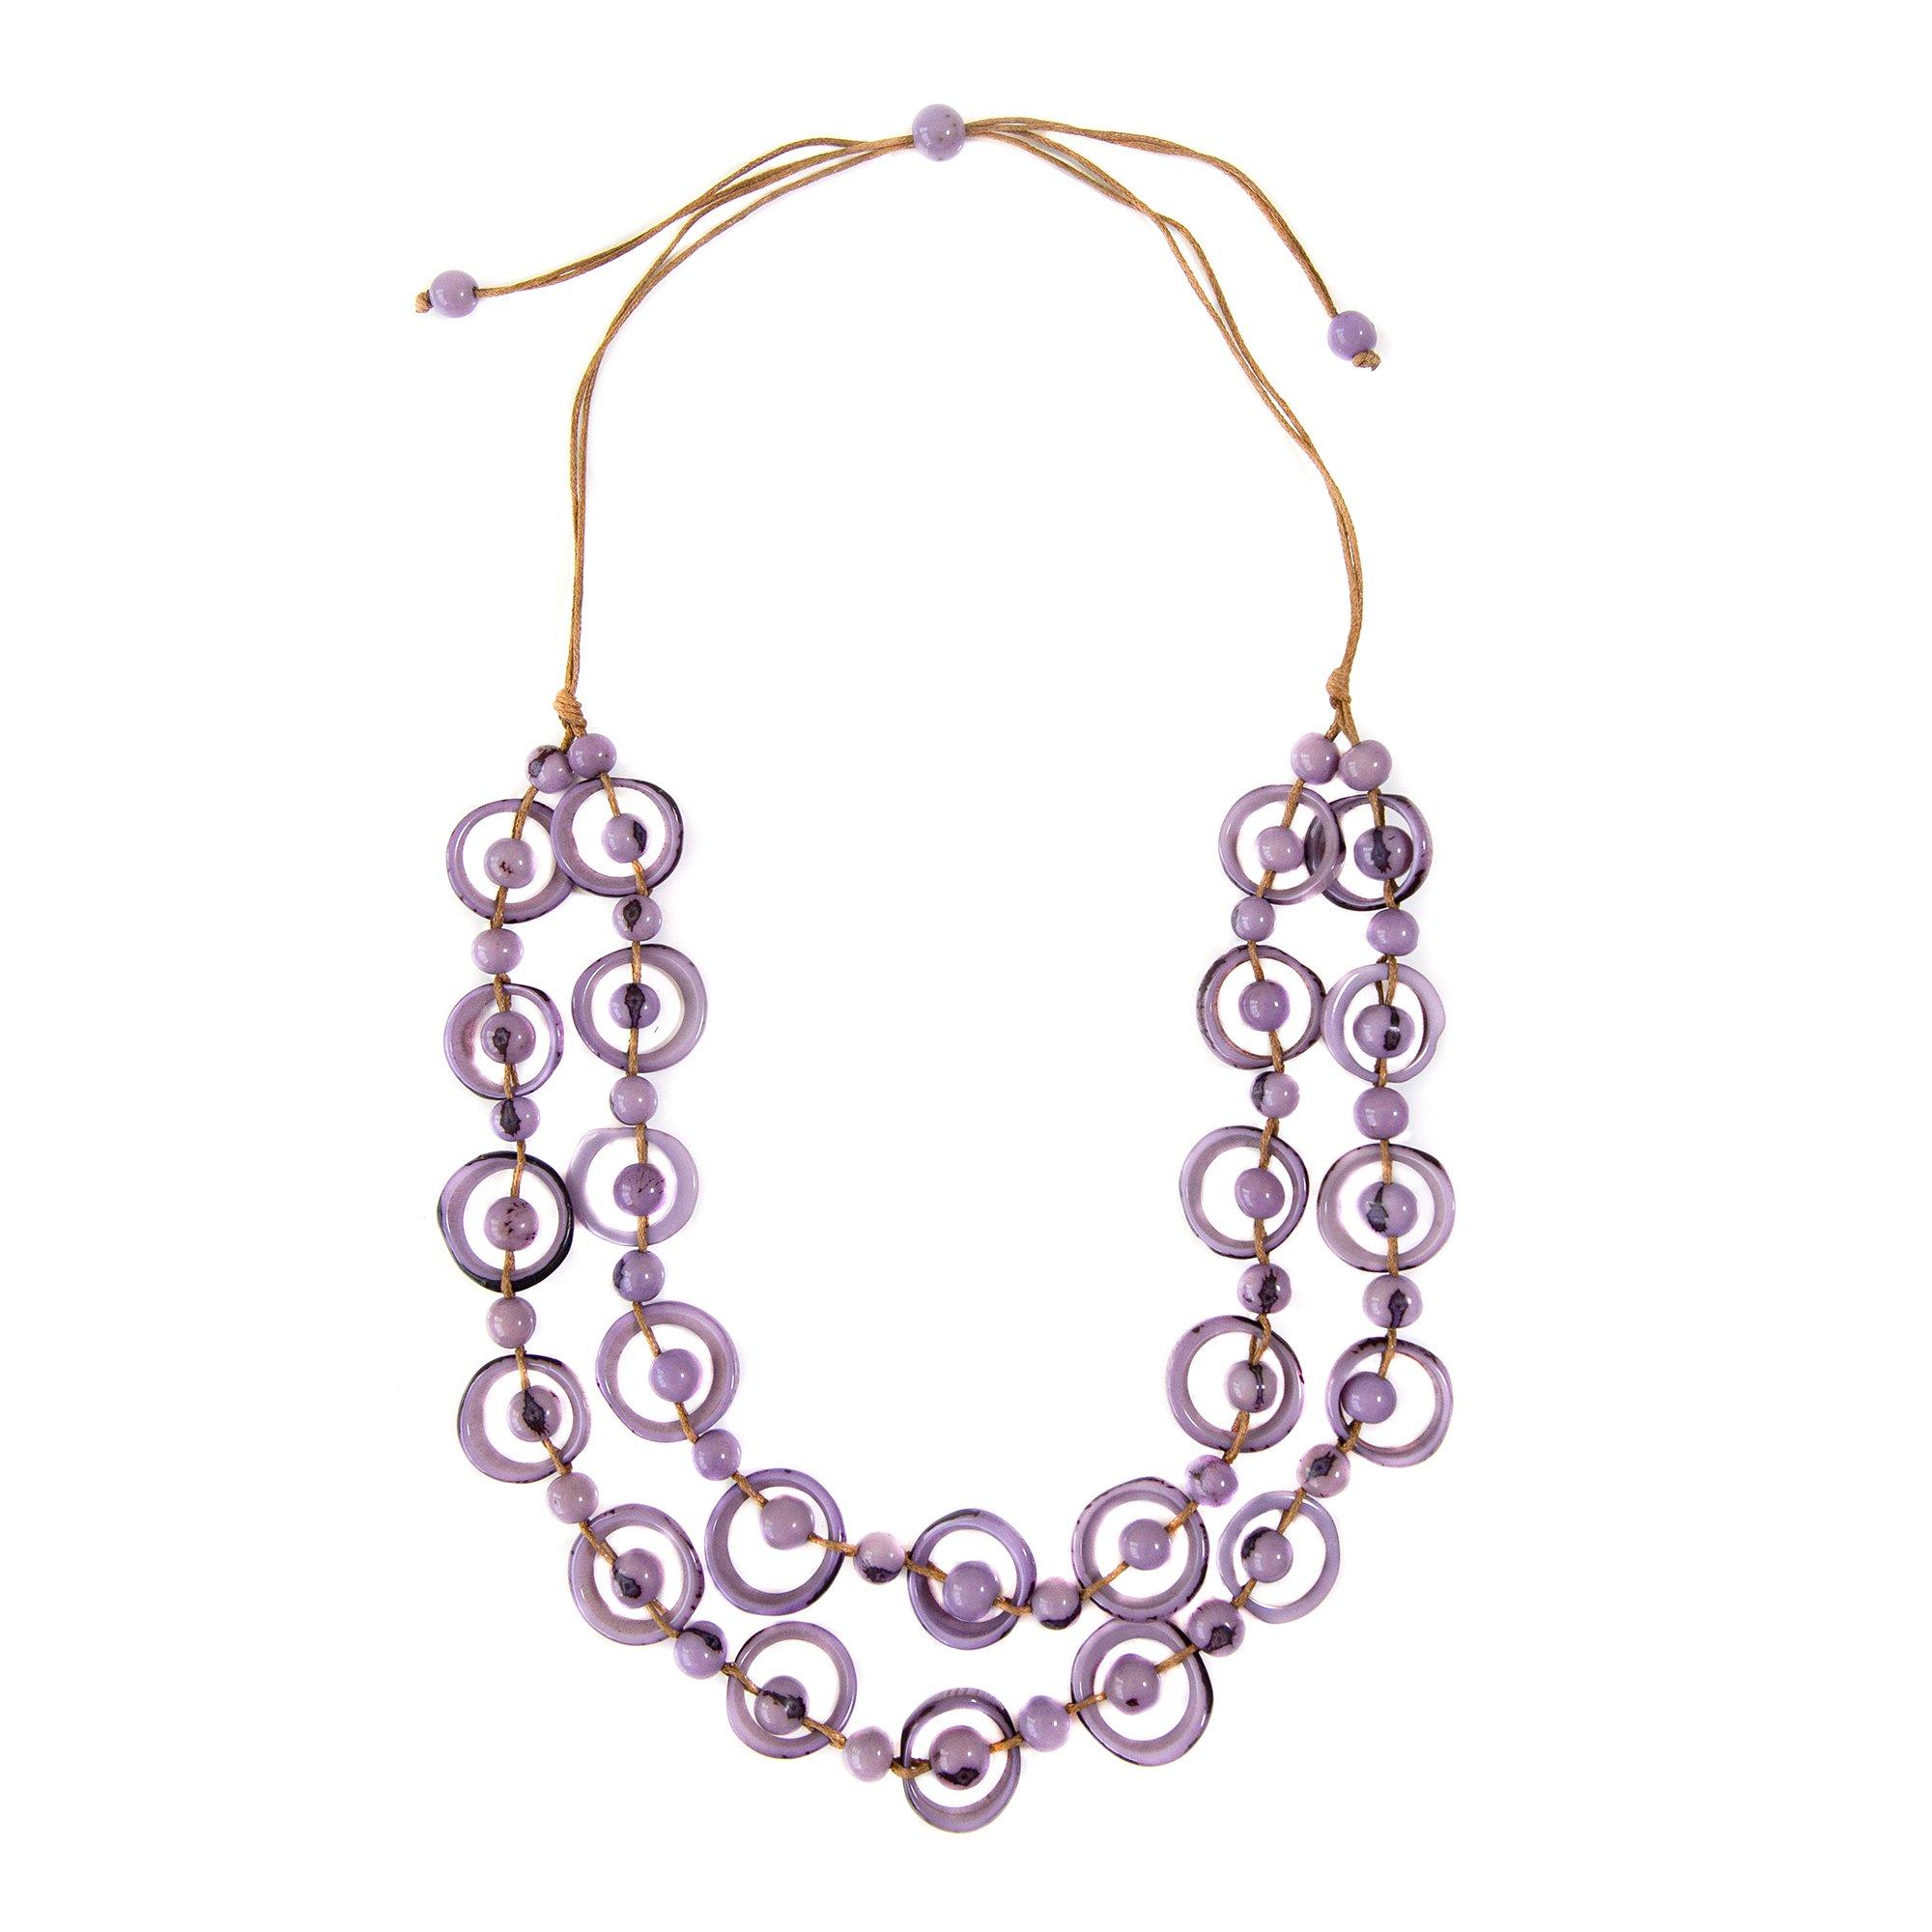 Tagua 2-Row 20 In. Beaded Circles Adjustable Necklace